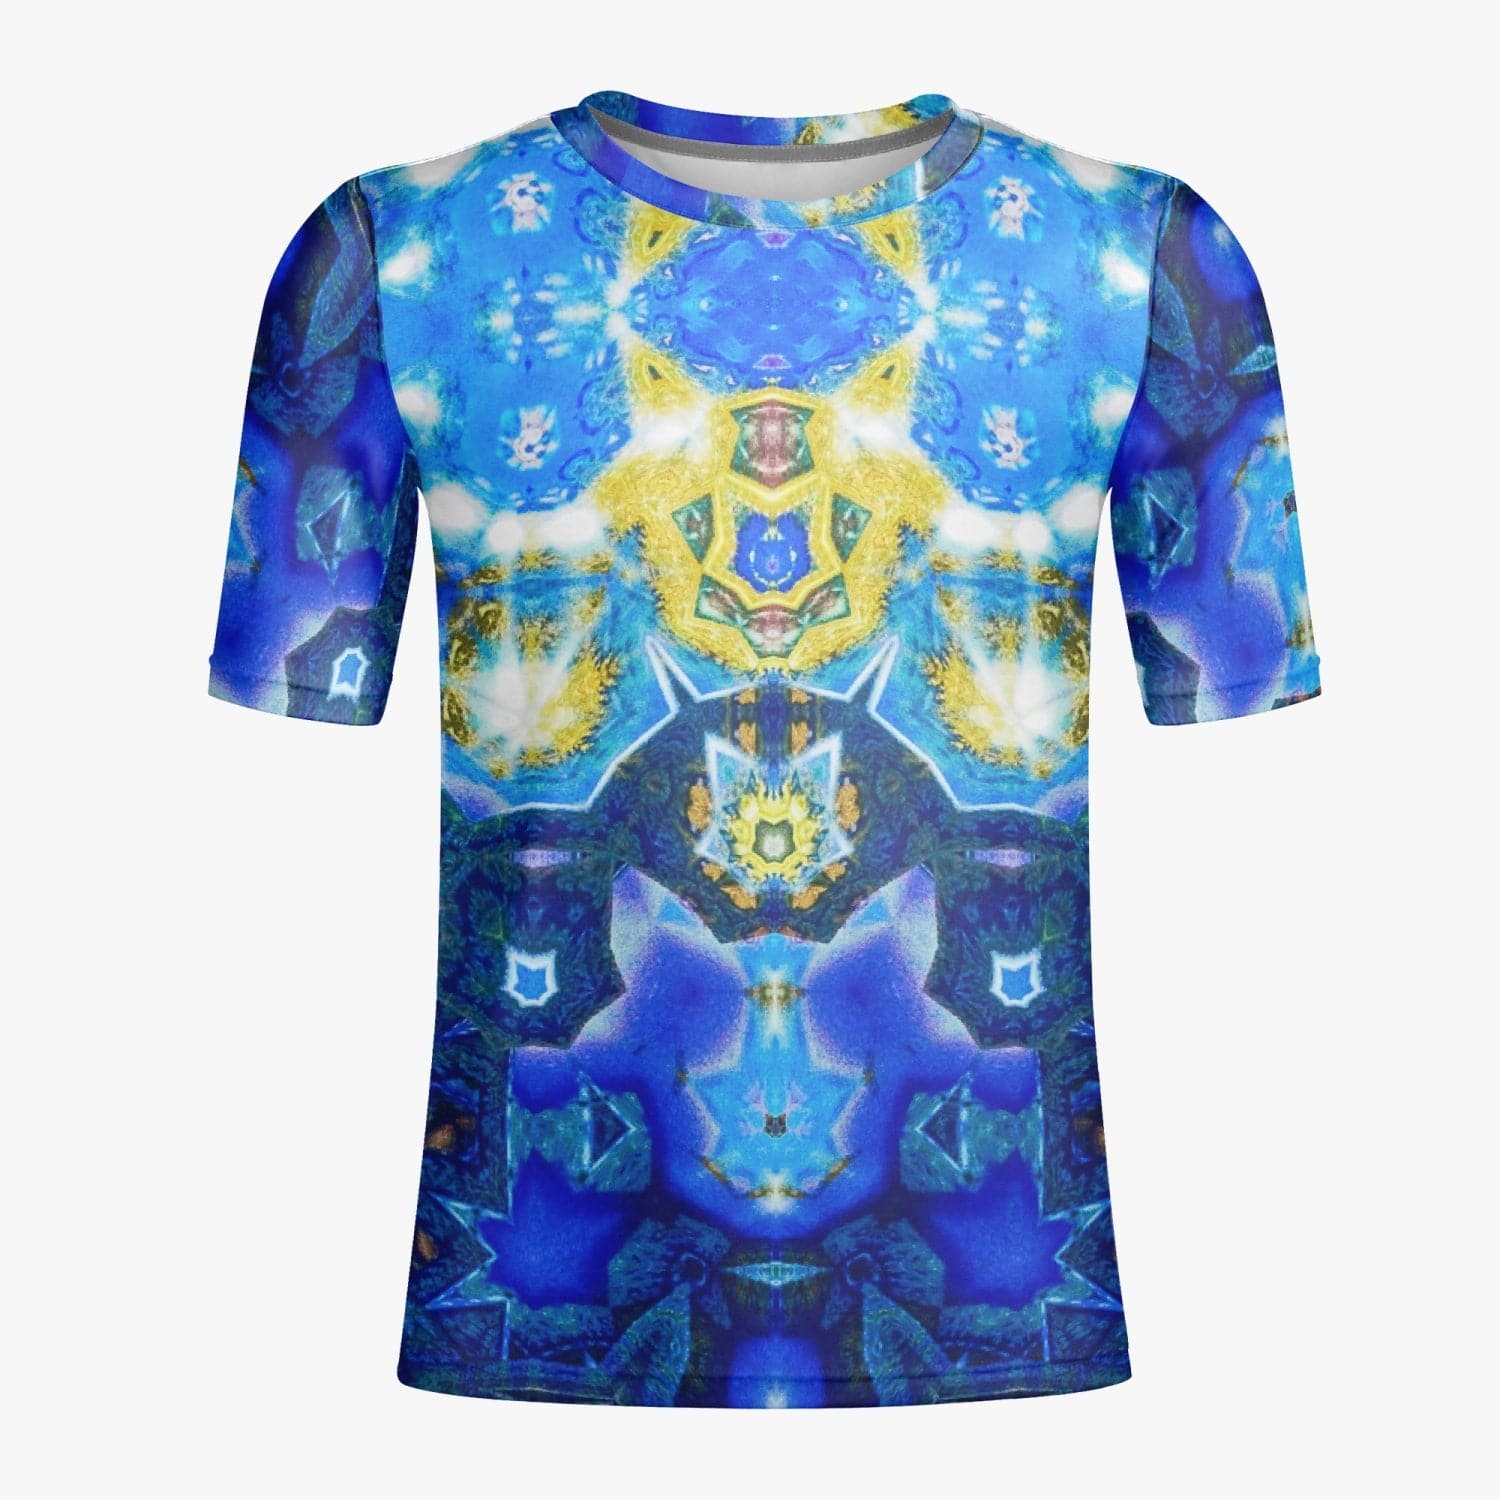 Enlightenment Blue with Yellow Pattern Handmade T-shirt for Men by Sensus Studio Design